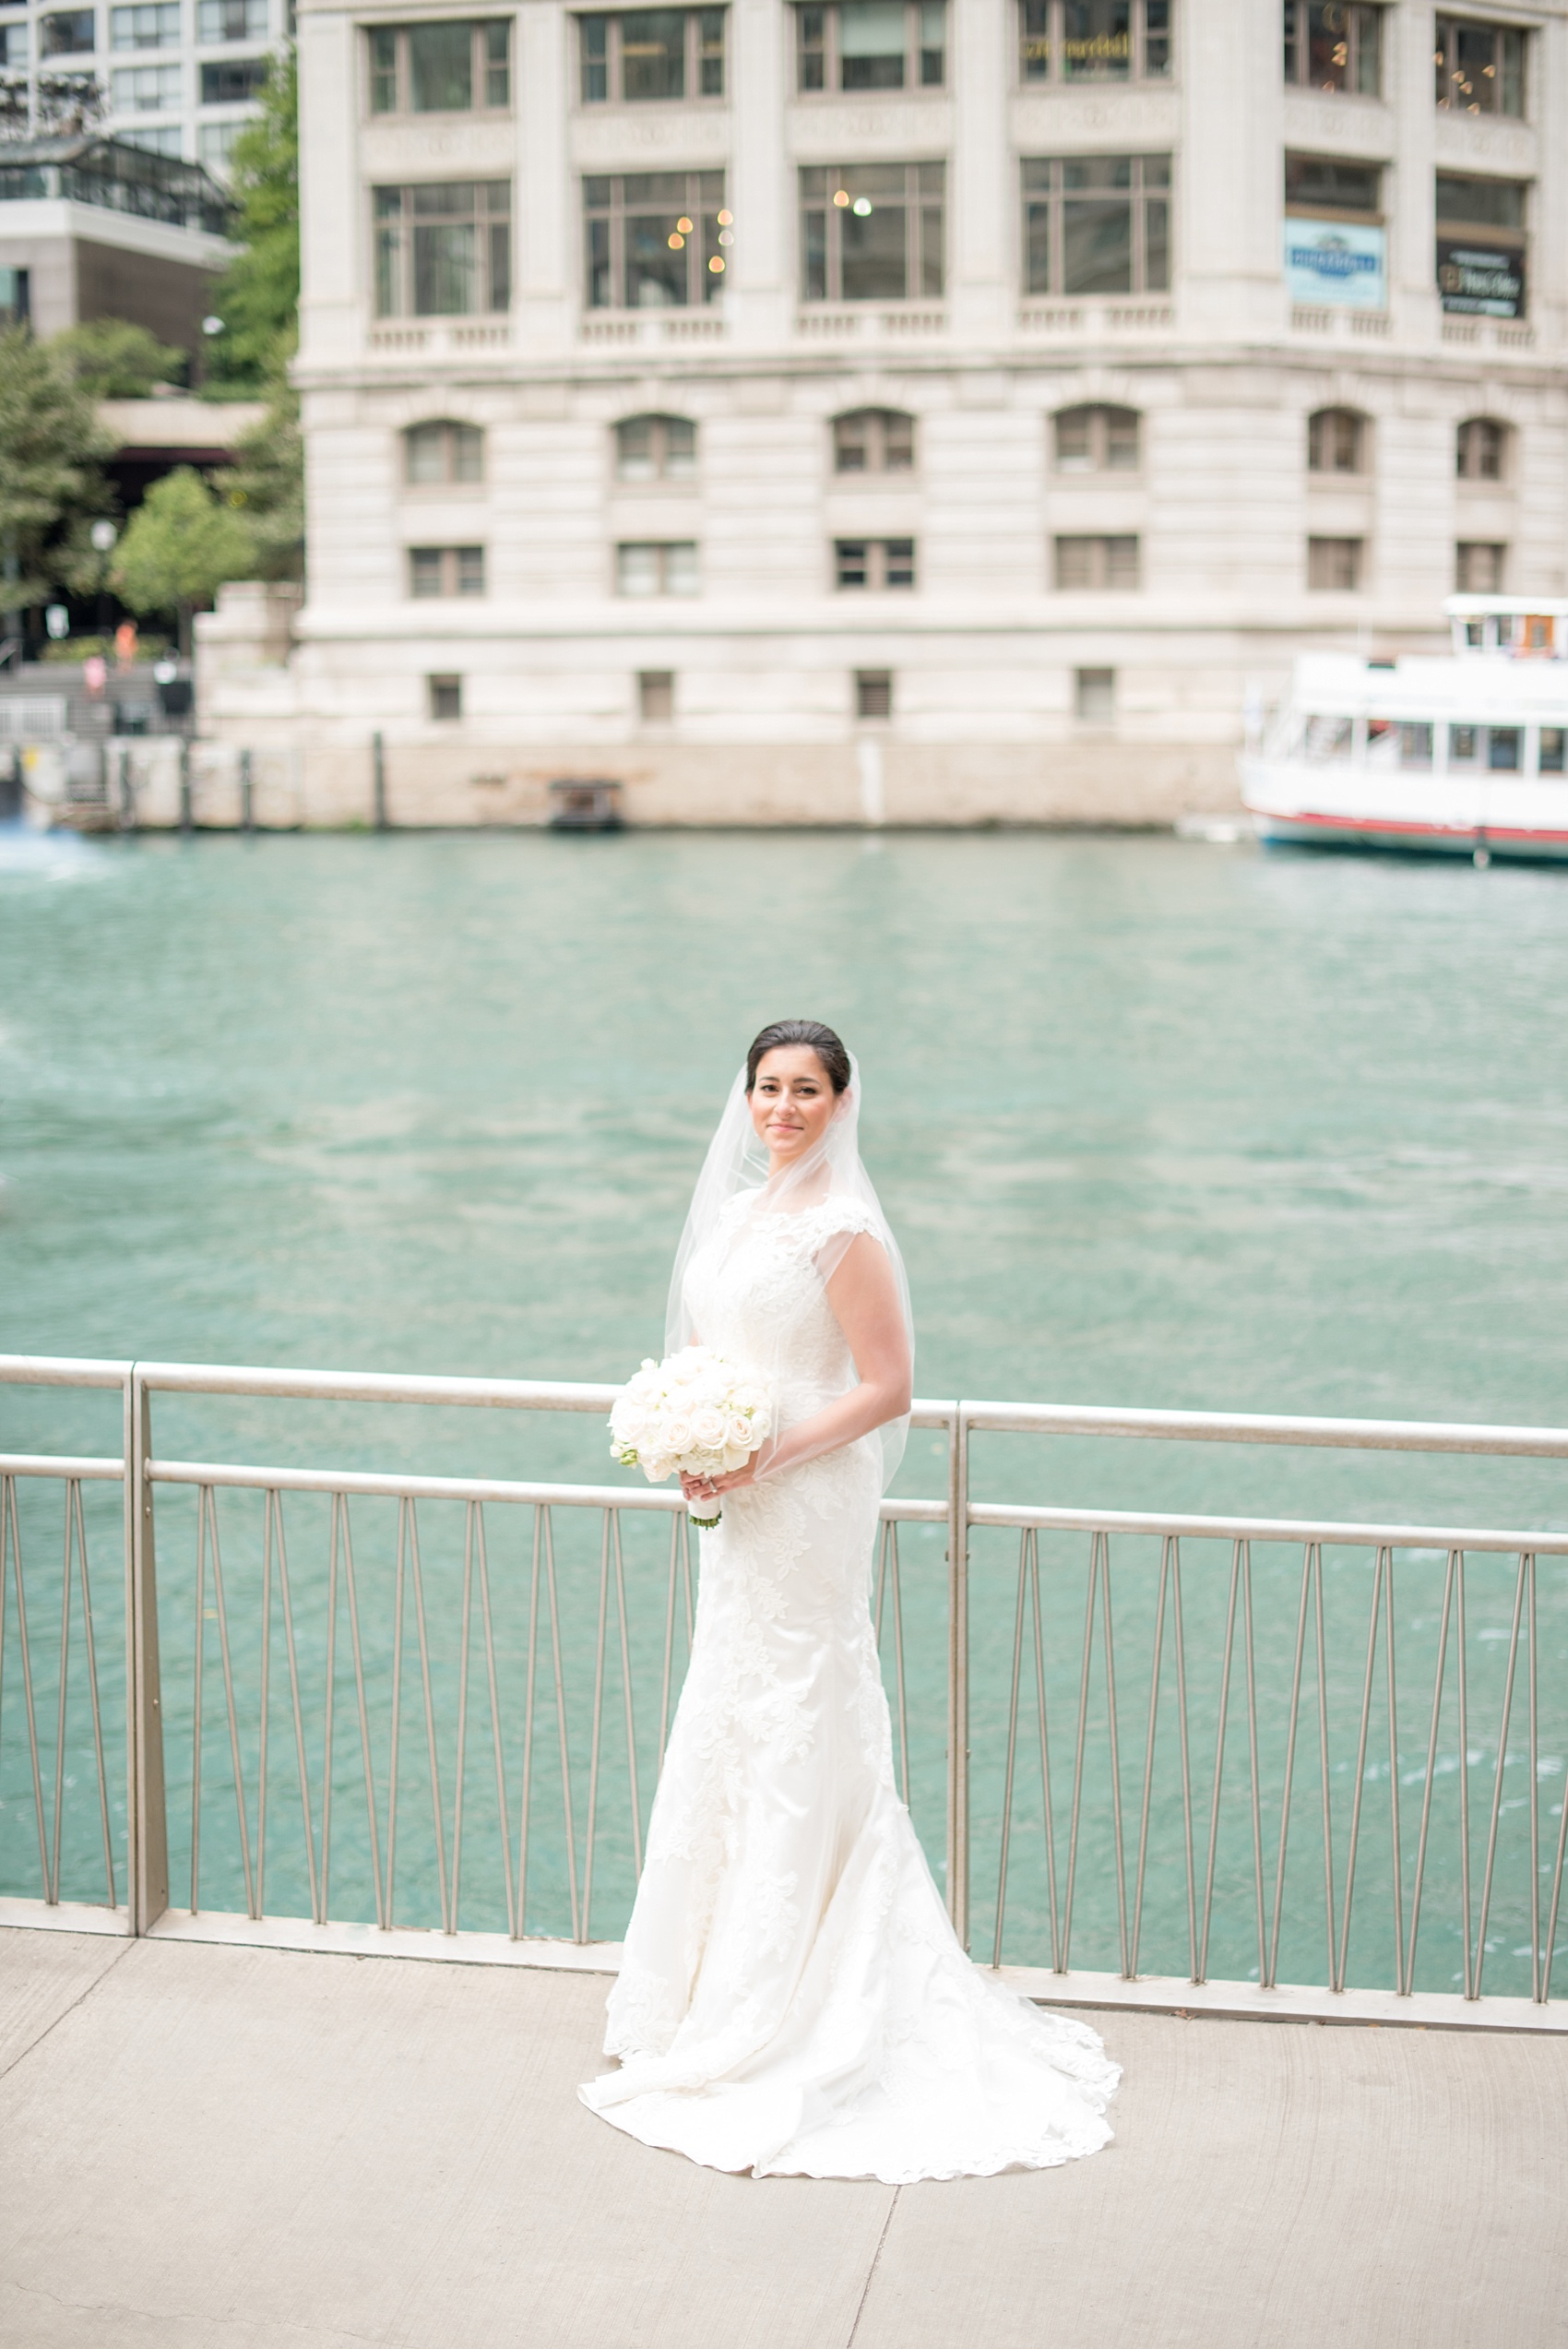 Mikkel Paige Photography photos of a wedding in downtown Chicago at The Rookery. An iconic photo of the bride in a Justin Alexander lace gown with her veil in the wind, holding a rose bouquet.